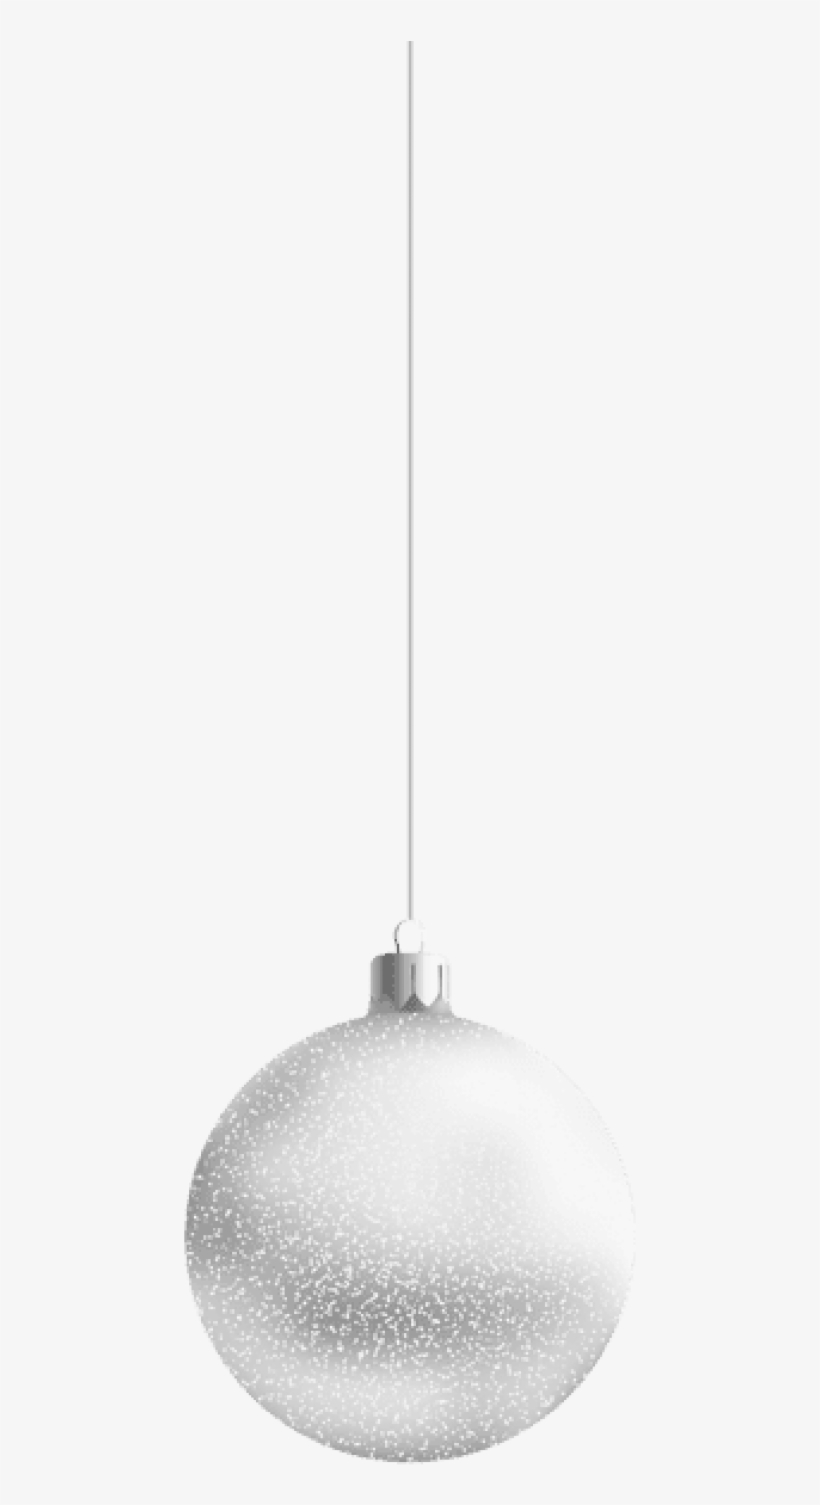 Free Png Christmas Ball White Png - Still Life Photography, transparent png #8137860